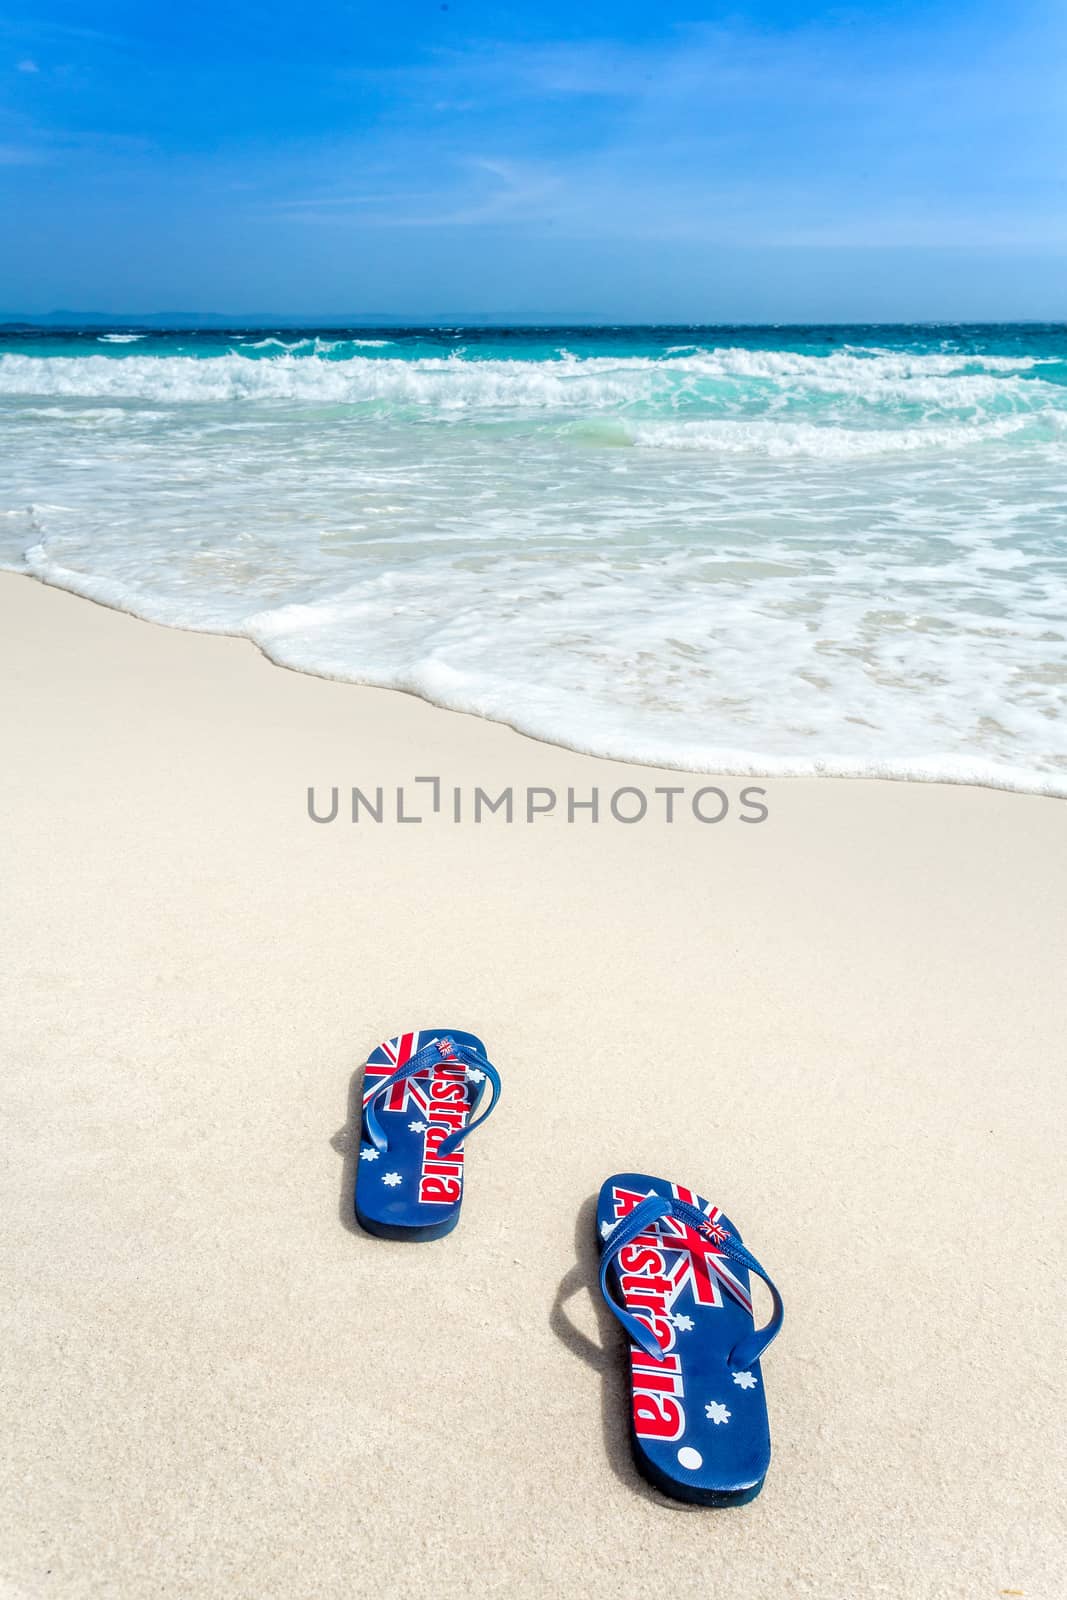 Australian flag printed on thongs on the beachwith an encrouching wave coming toward them  in summer sun